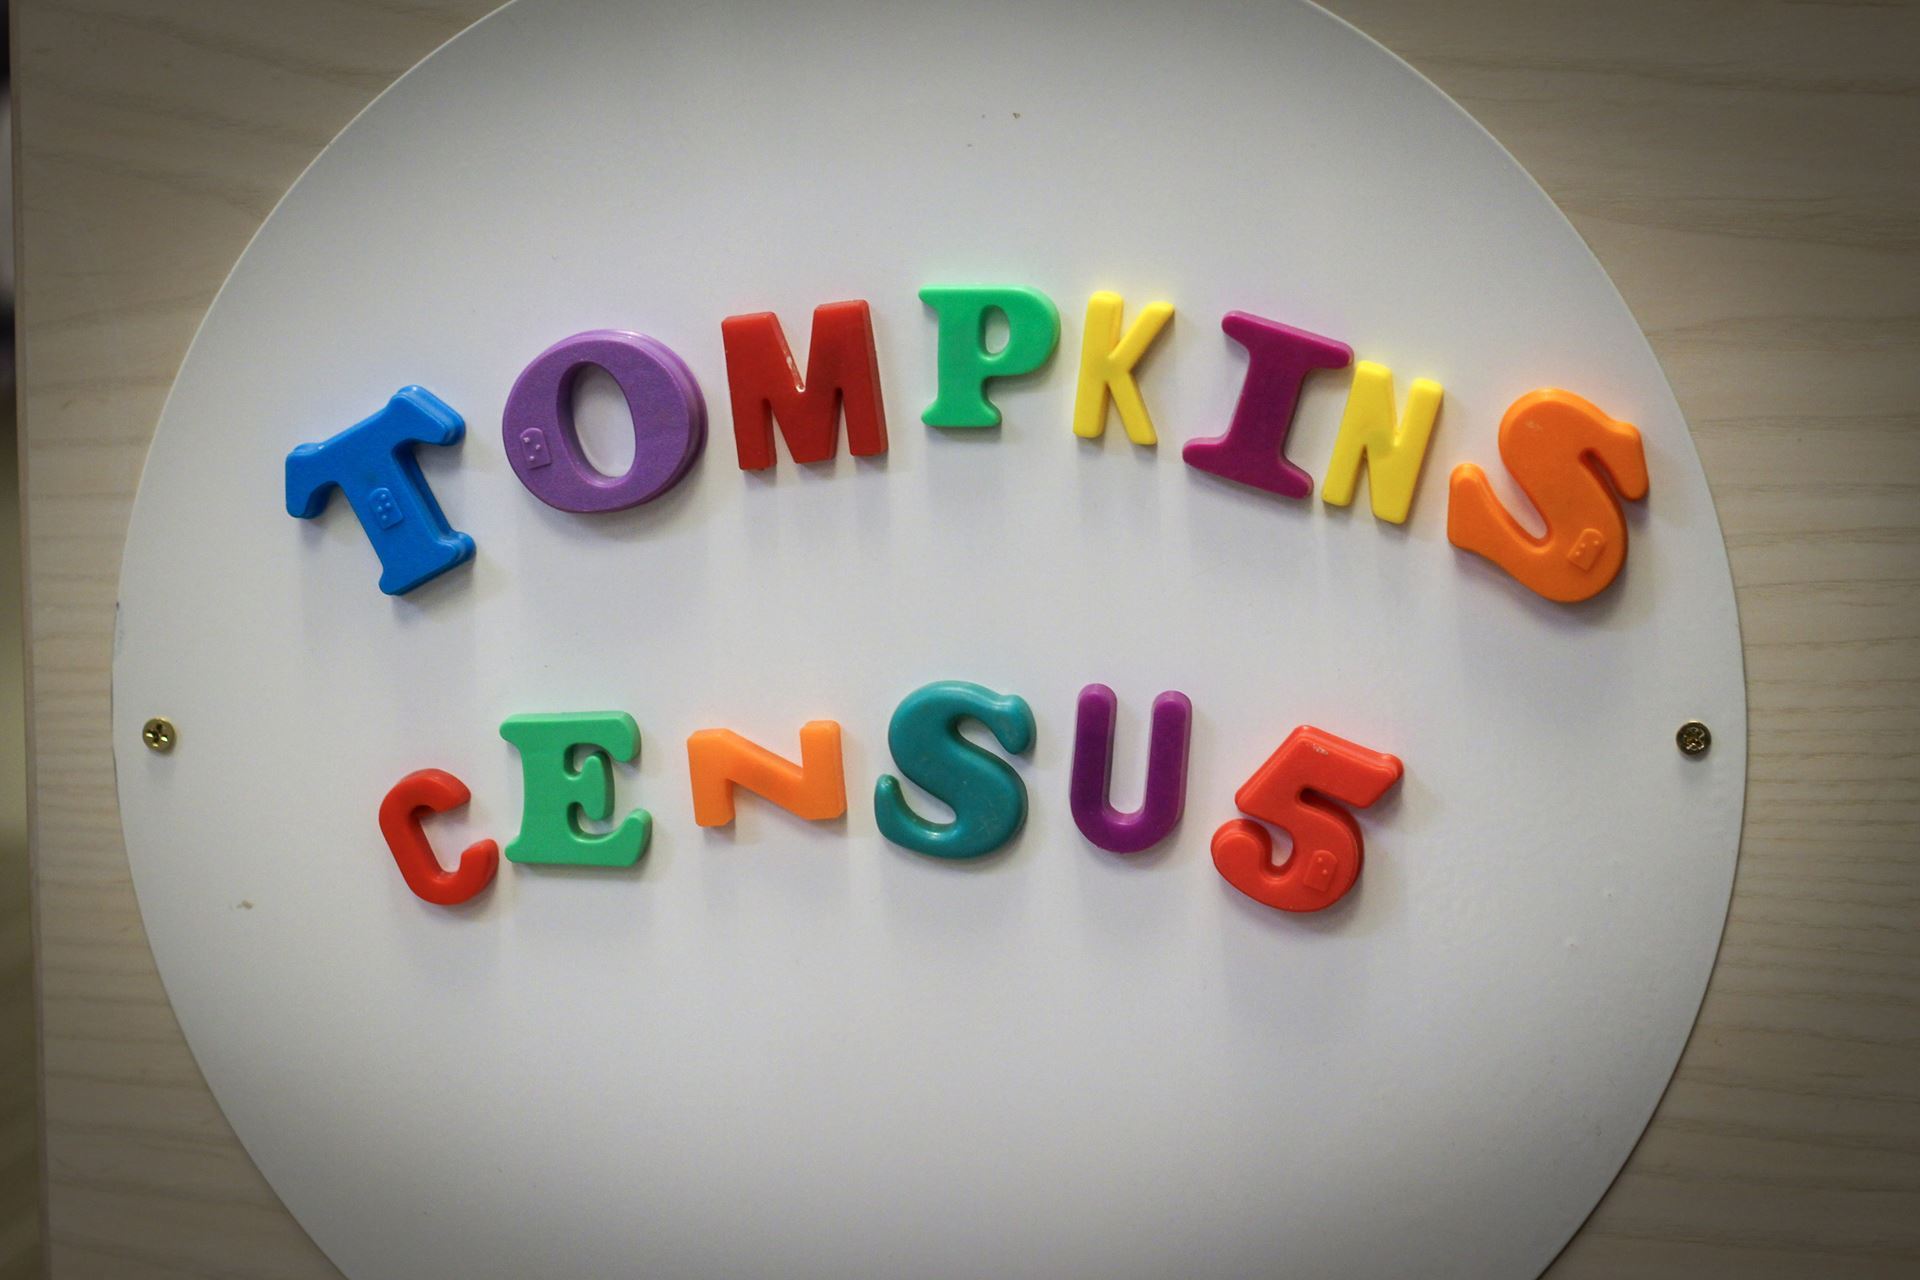 A rectangular image of colorful letter magnets that read "Tompkins Census". The 'n' in census uses a horizonal z and the 's' uses a 5.